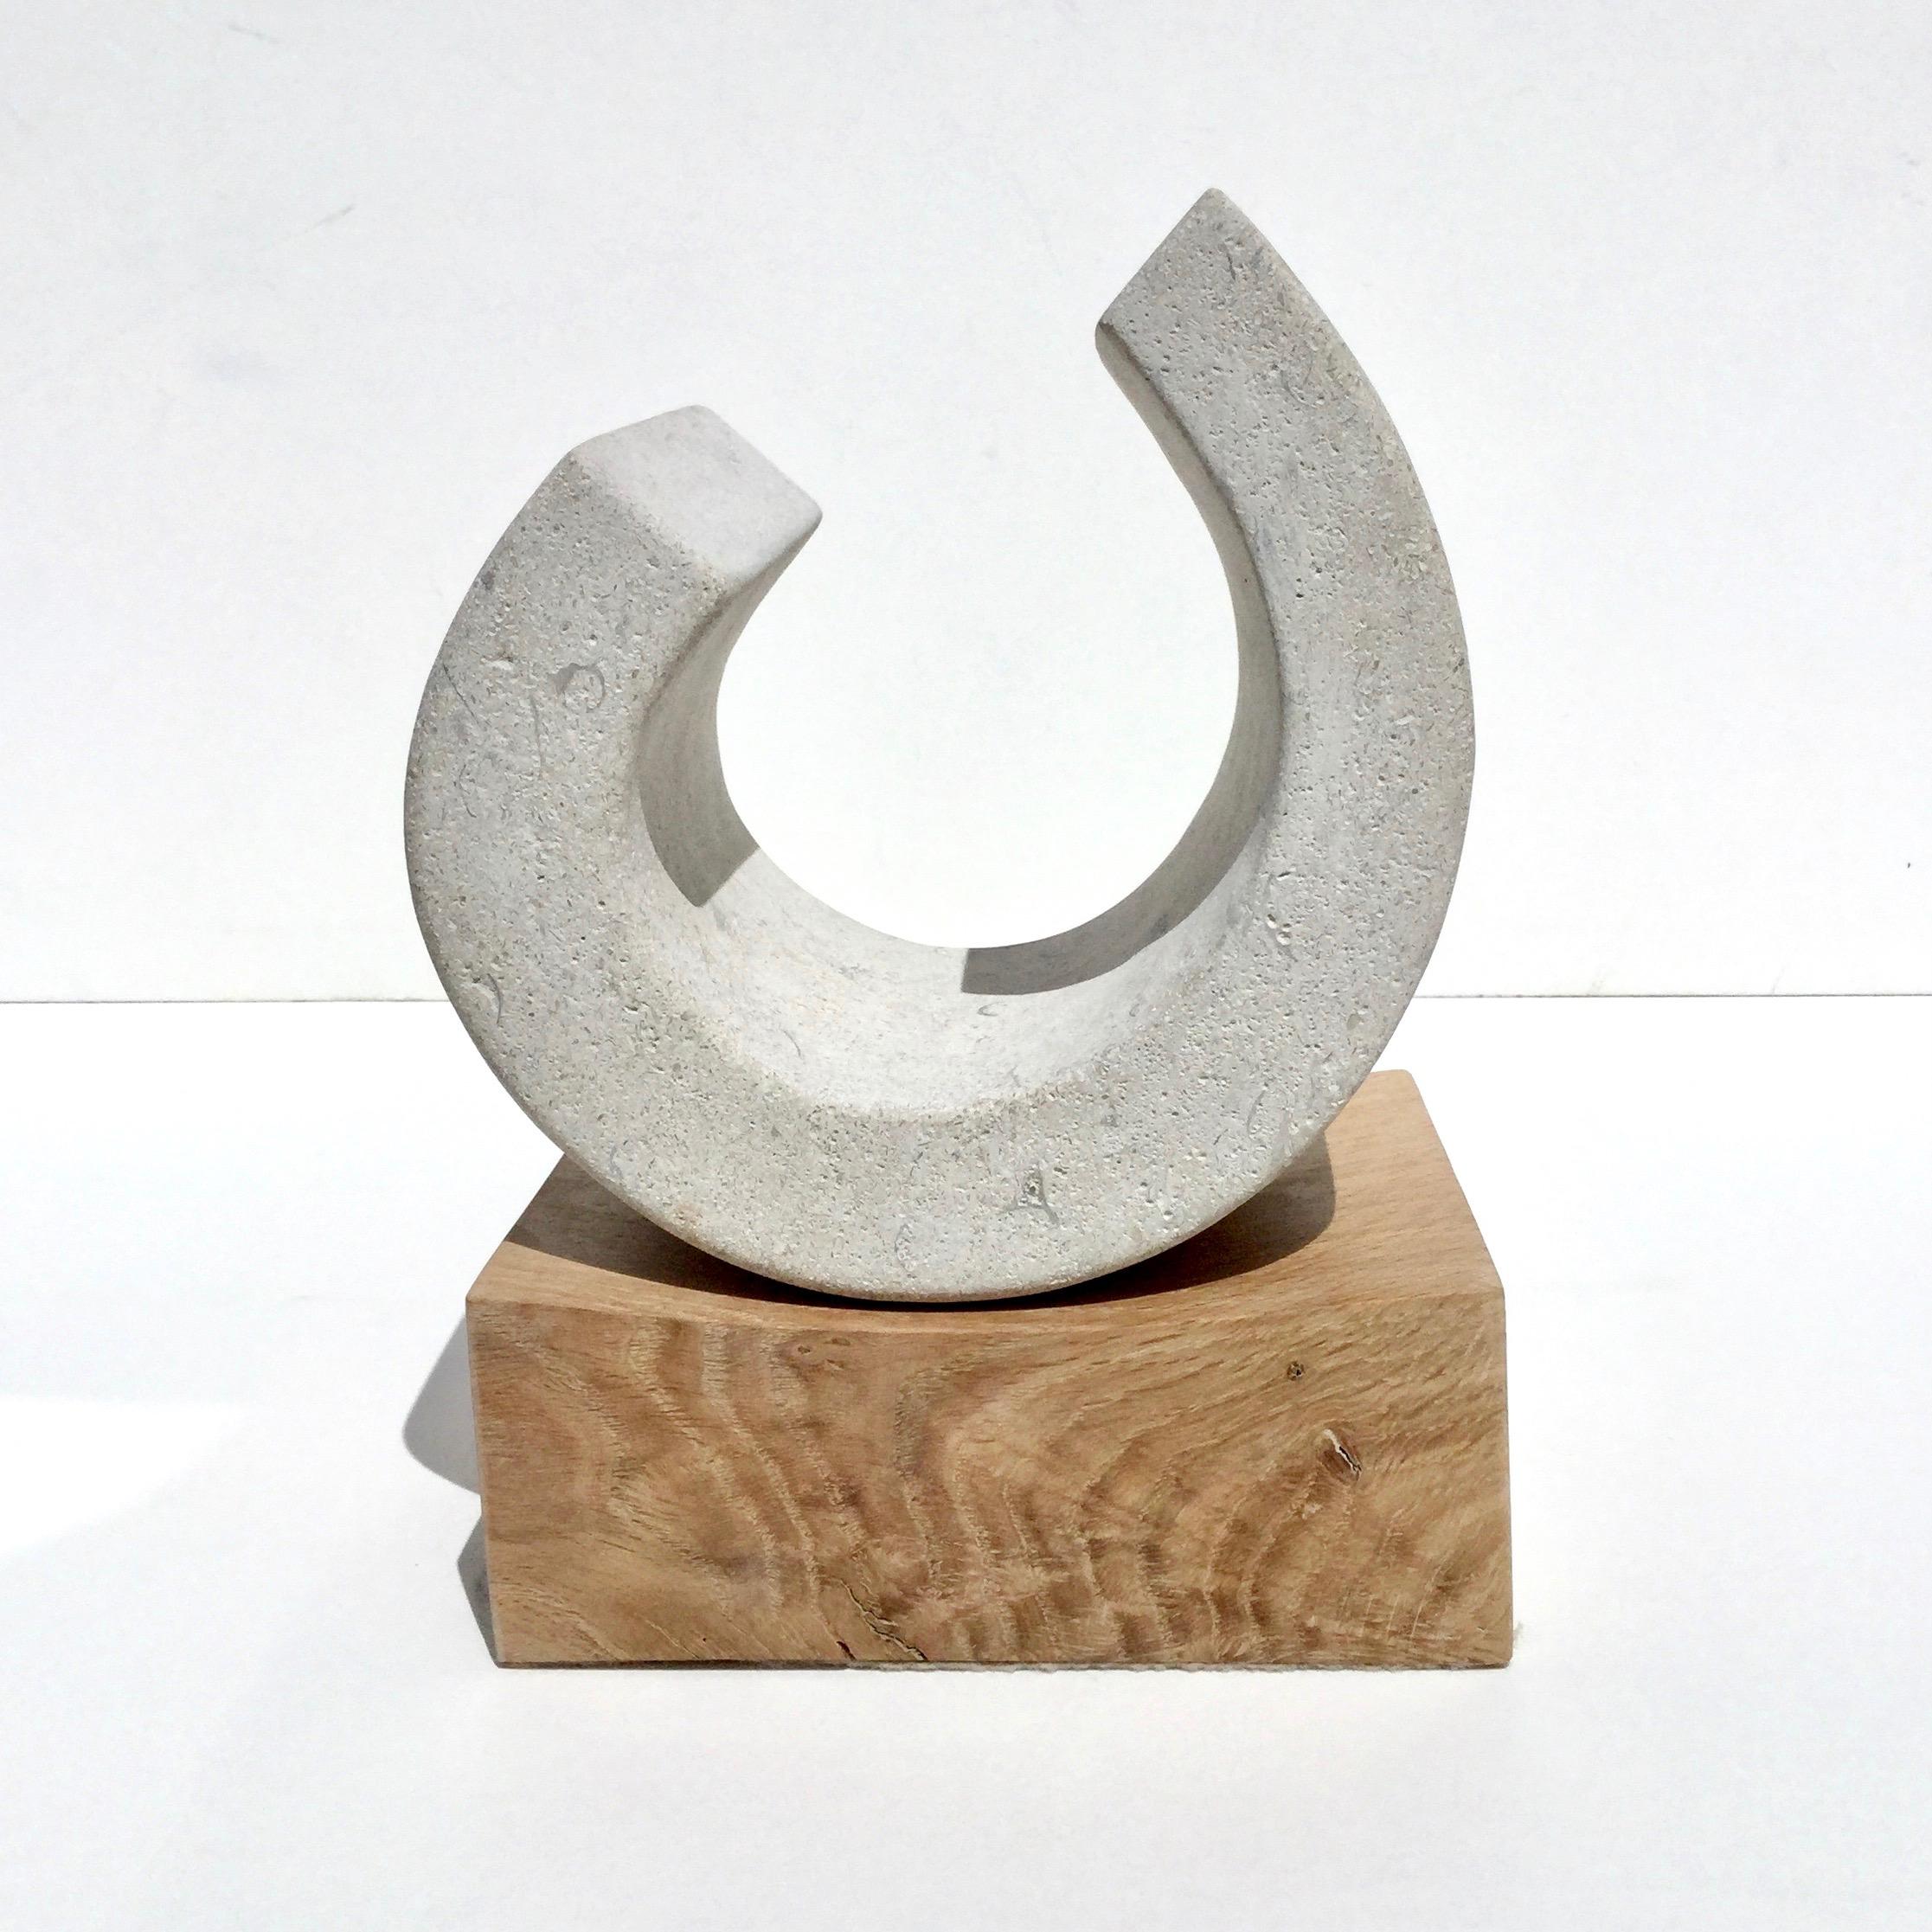 Hartham stone and kiln-dried oak base.


Richard Fox started to focus on his form of sculpture in 2005. After visiting Barbara Hepworth's studio and seeing her wood sculptures, he spent innumerable hours on creating his unique method of sculpting